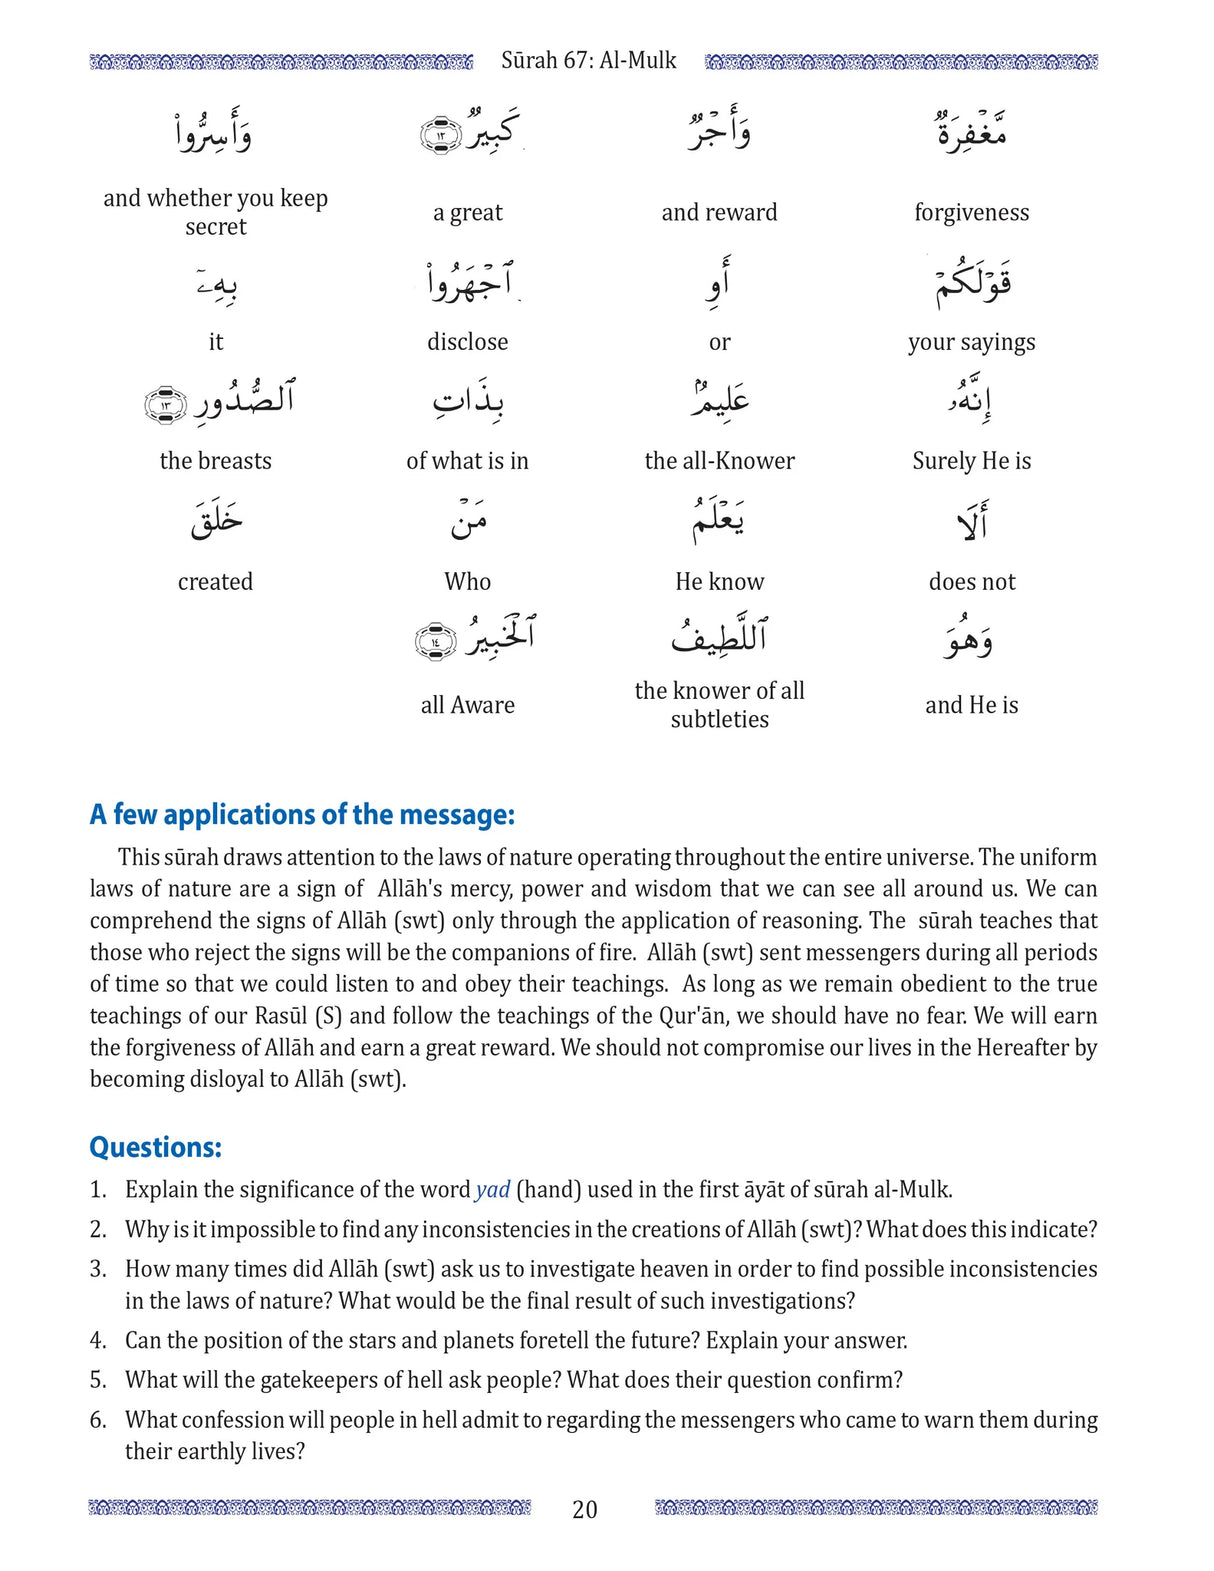 Juz Tabarak Part 29 of the Qur'an : Color Coded